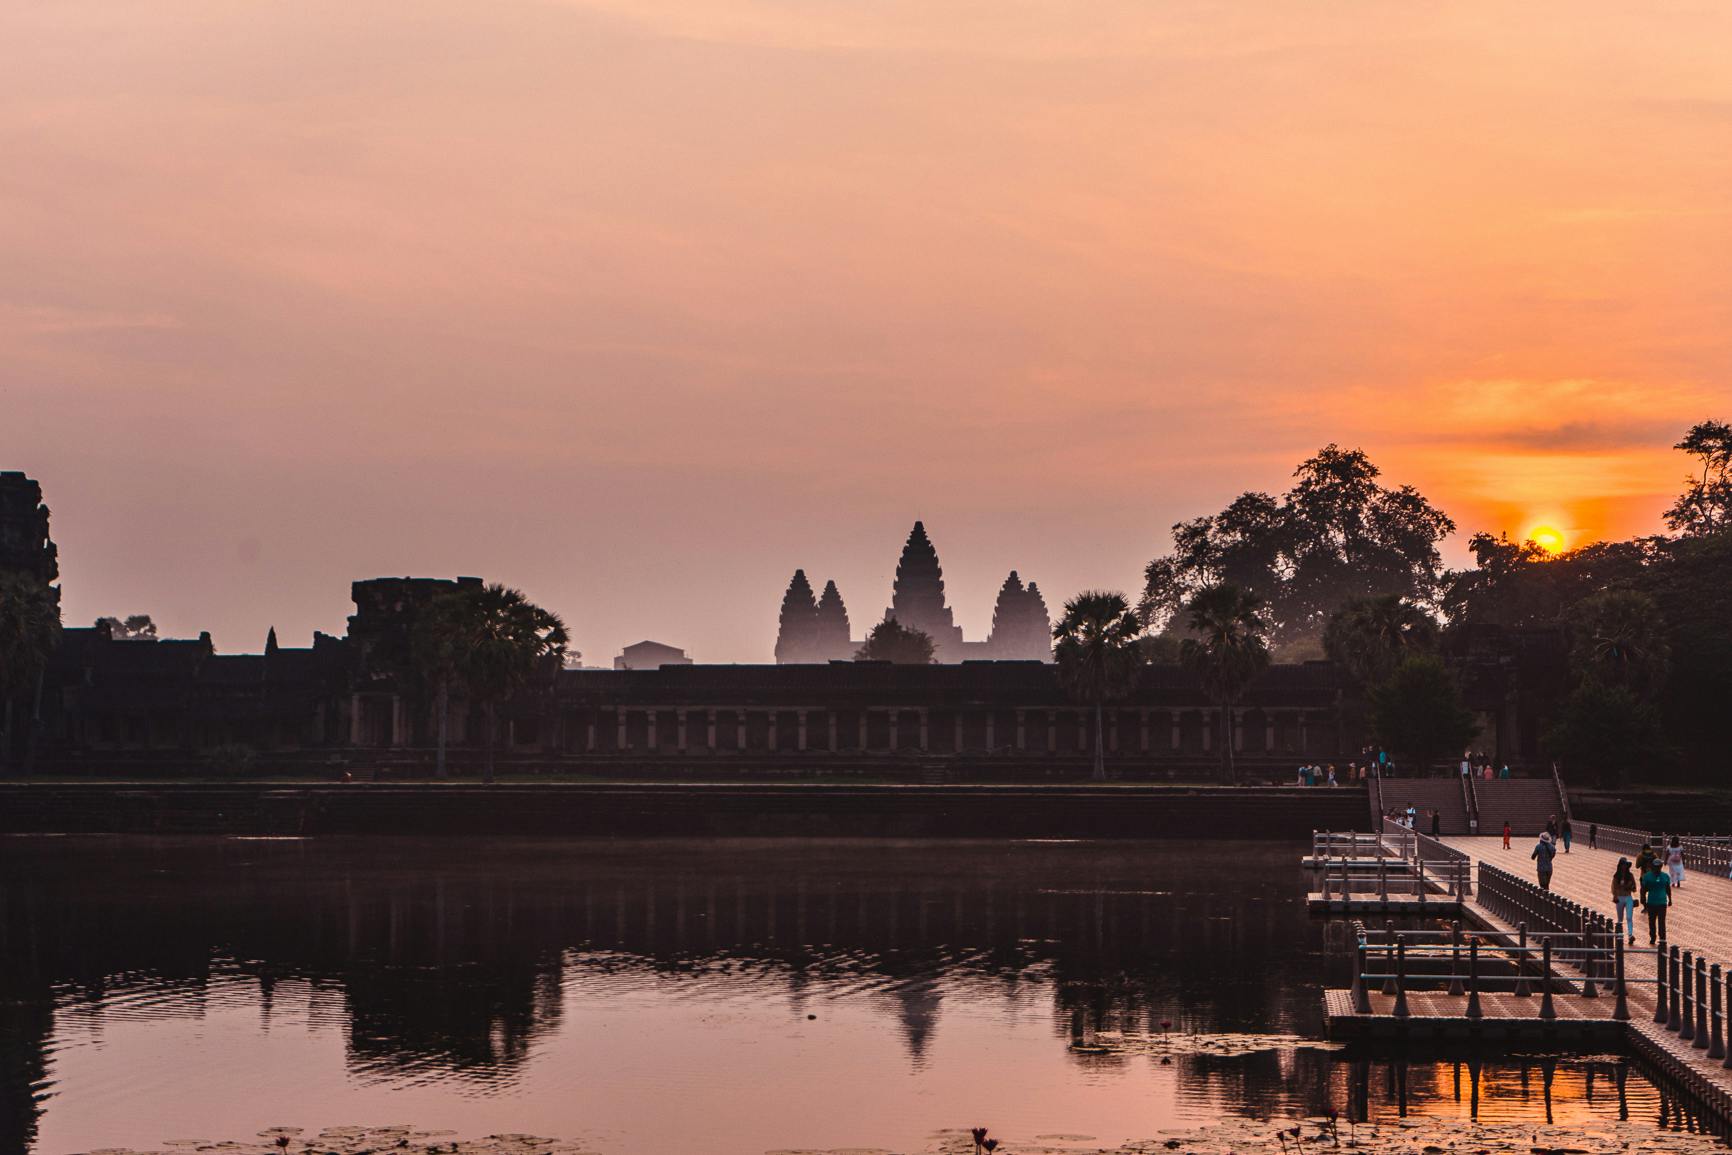 Sunrise at Angkor Wat and Angkor complex discovery by 4x4